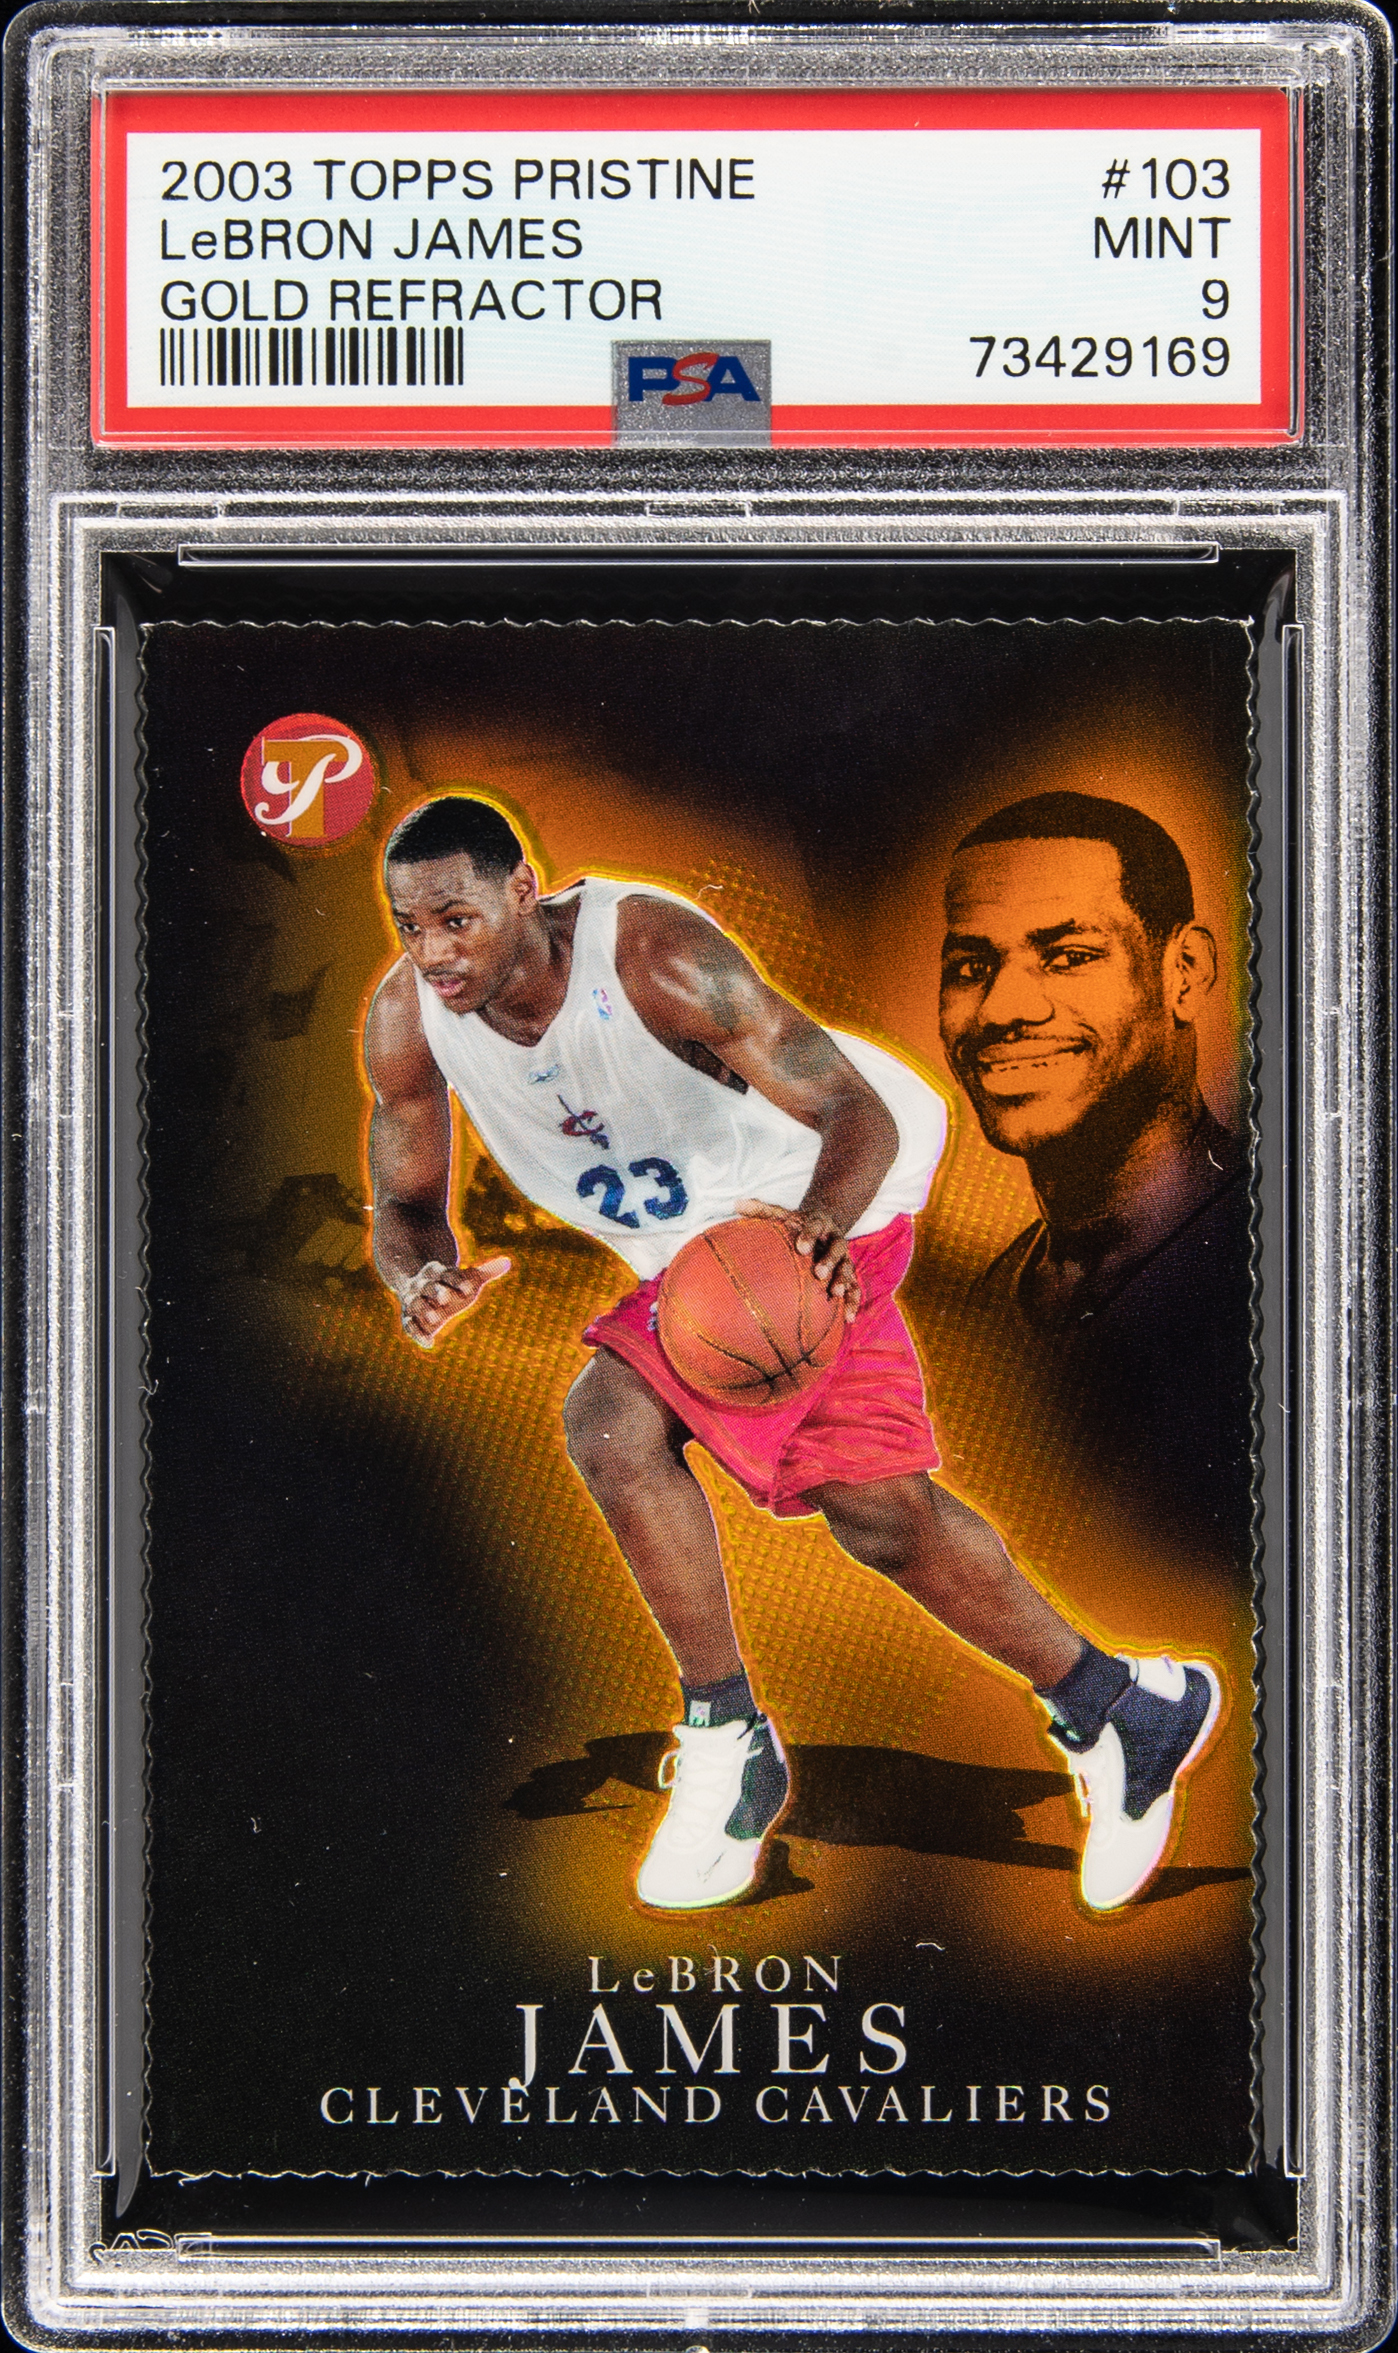 2003-04 Topps Pristine Gold Refractor #103 LeBron James Rookie Card (#22/99) – PSA MINT 9